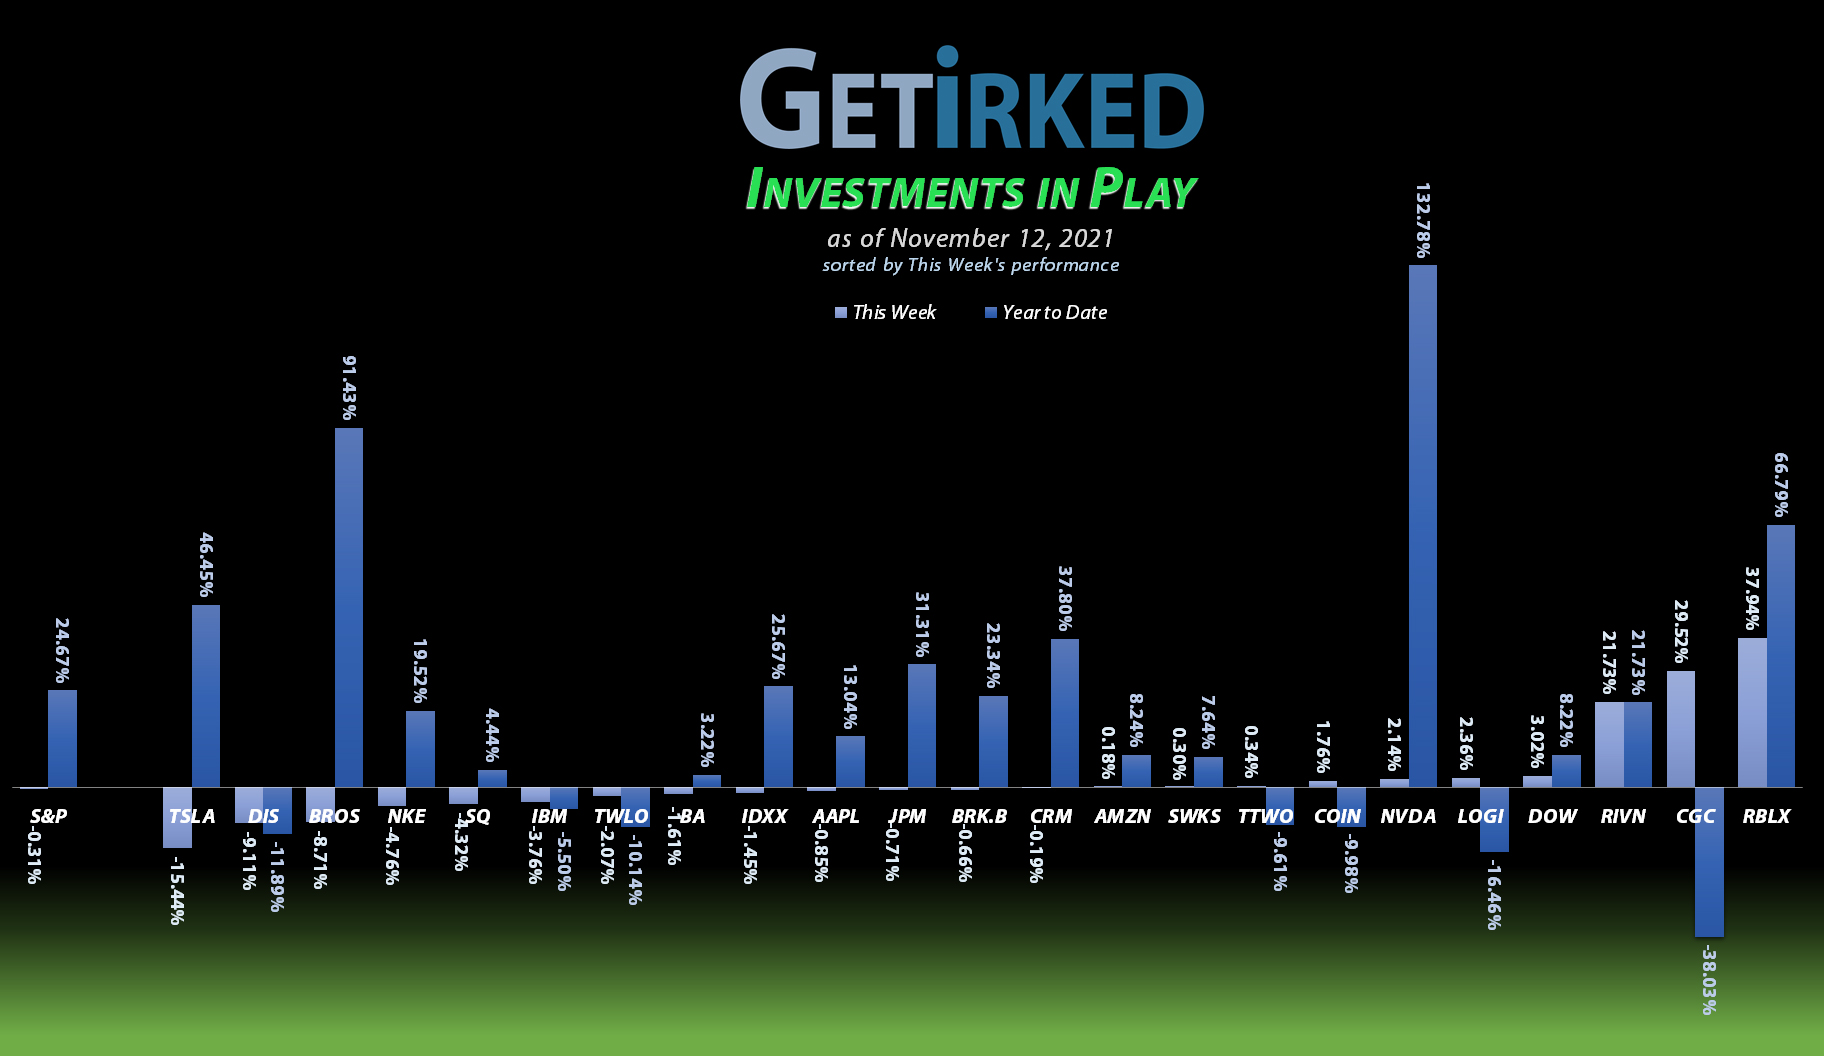 Get Irked - Investments in Play - November 12, 2021